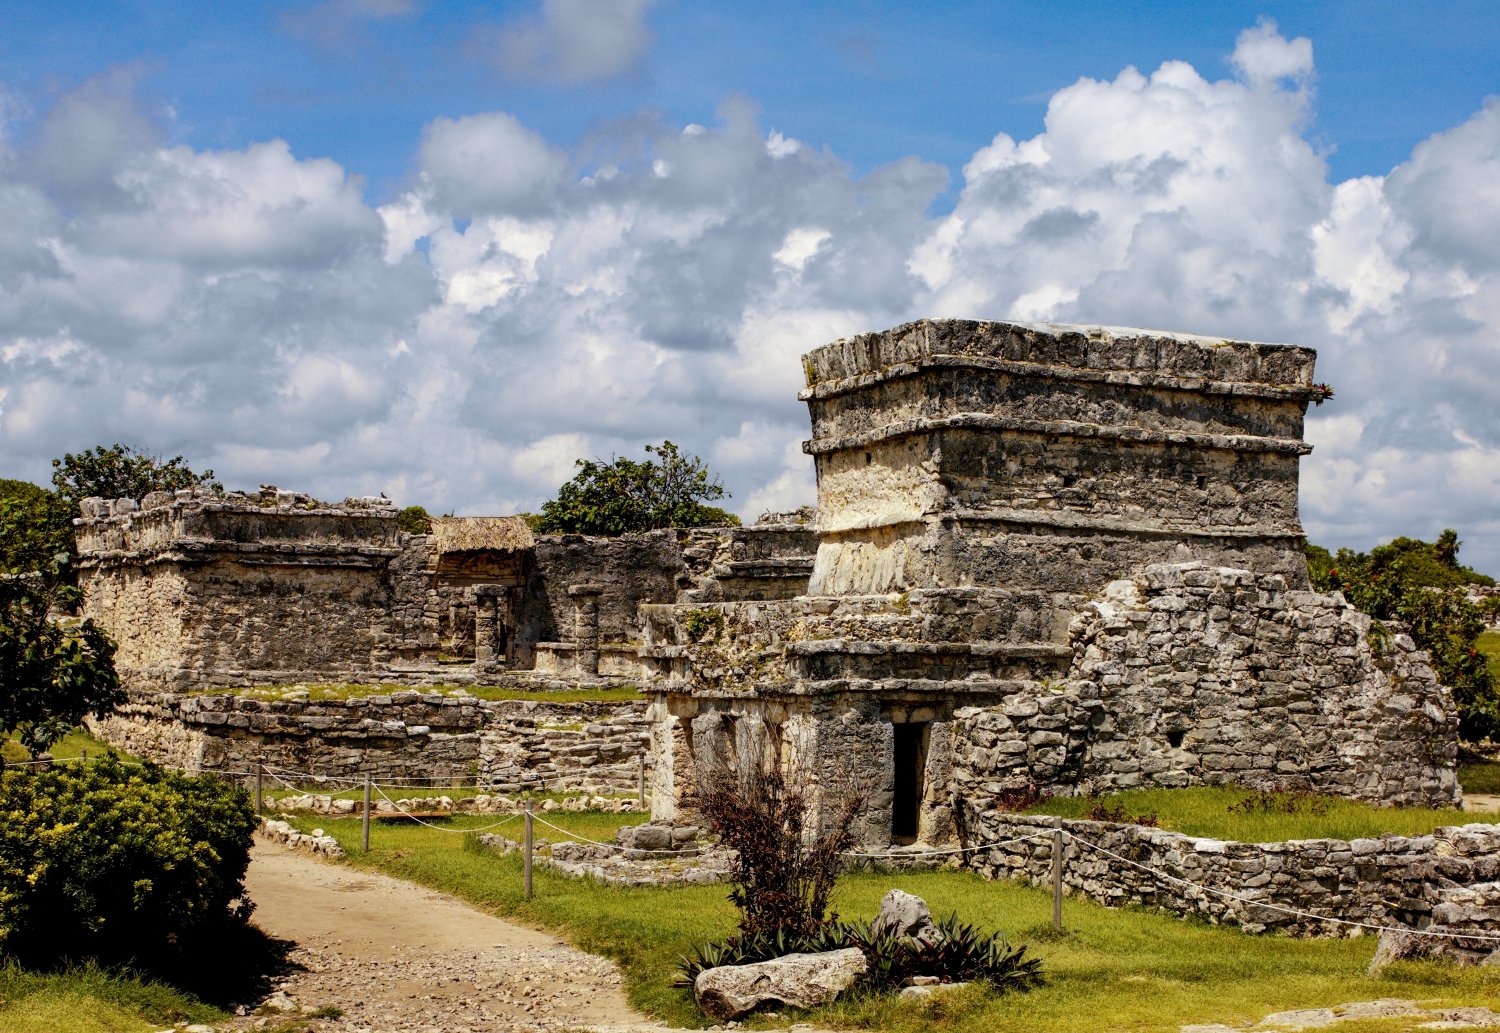 5 ruins that you cannot miss in the Riviera Maya